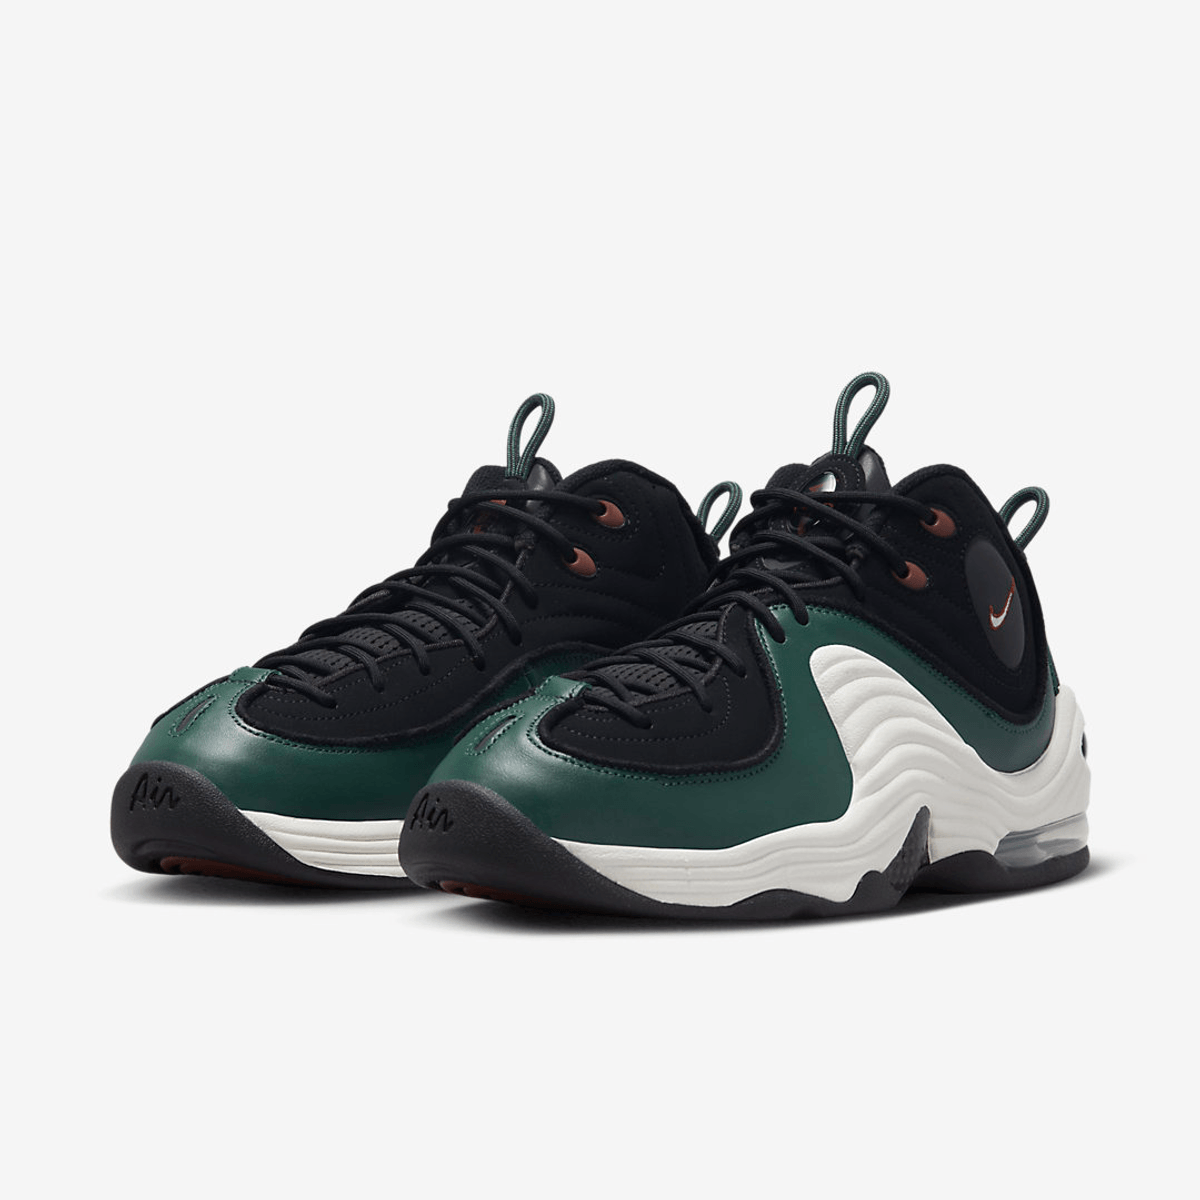 Score Big With The Nike Air Penny 2 Faded Spruce